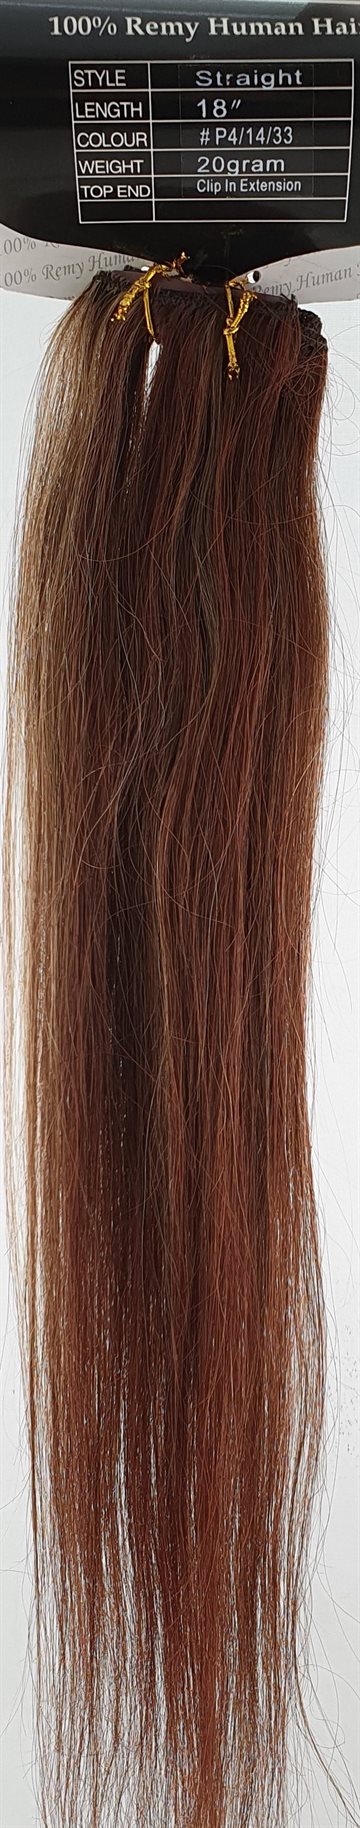 Human Hair - Clip in extention 18" color P4/14/33. Mixed.